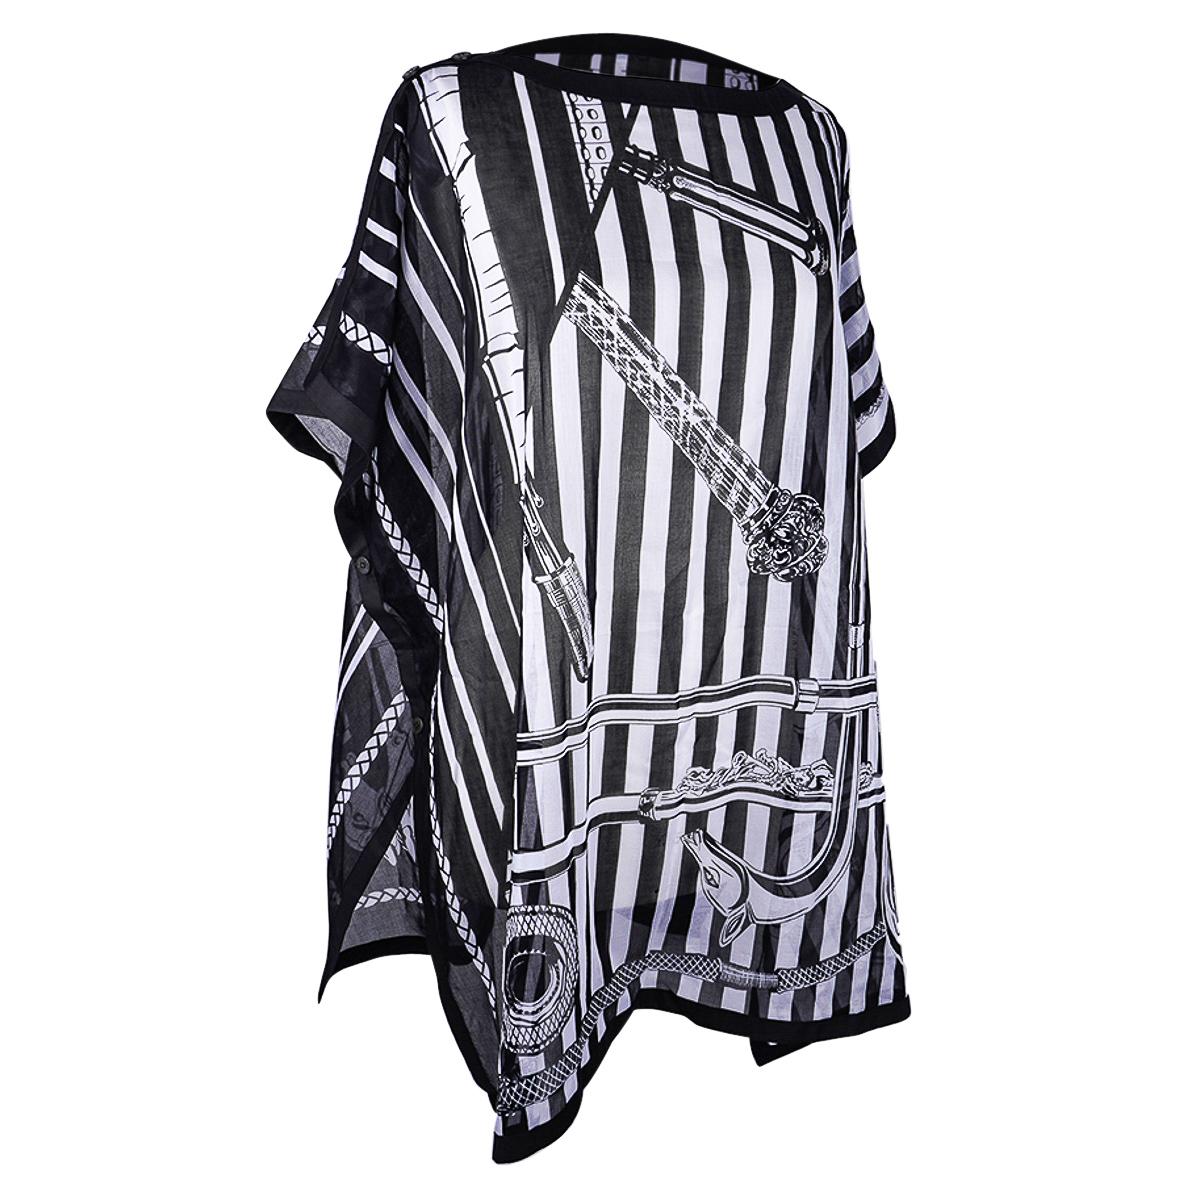 Mightychic offers an Hermes Tunique de Plage featured in Cannes et Cannes print.
This beautiful Black and White bather cover is airy light cotton voile.
Clou de Selle engraved Black Mother of Pearl buttons at the shoulder and along each side.
Band